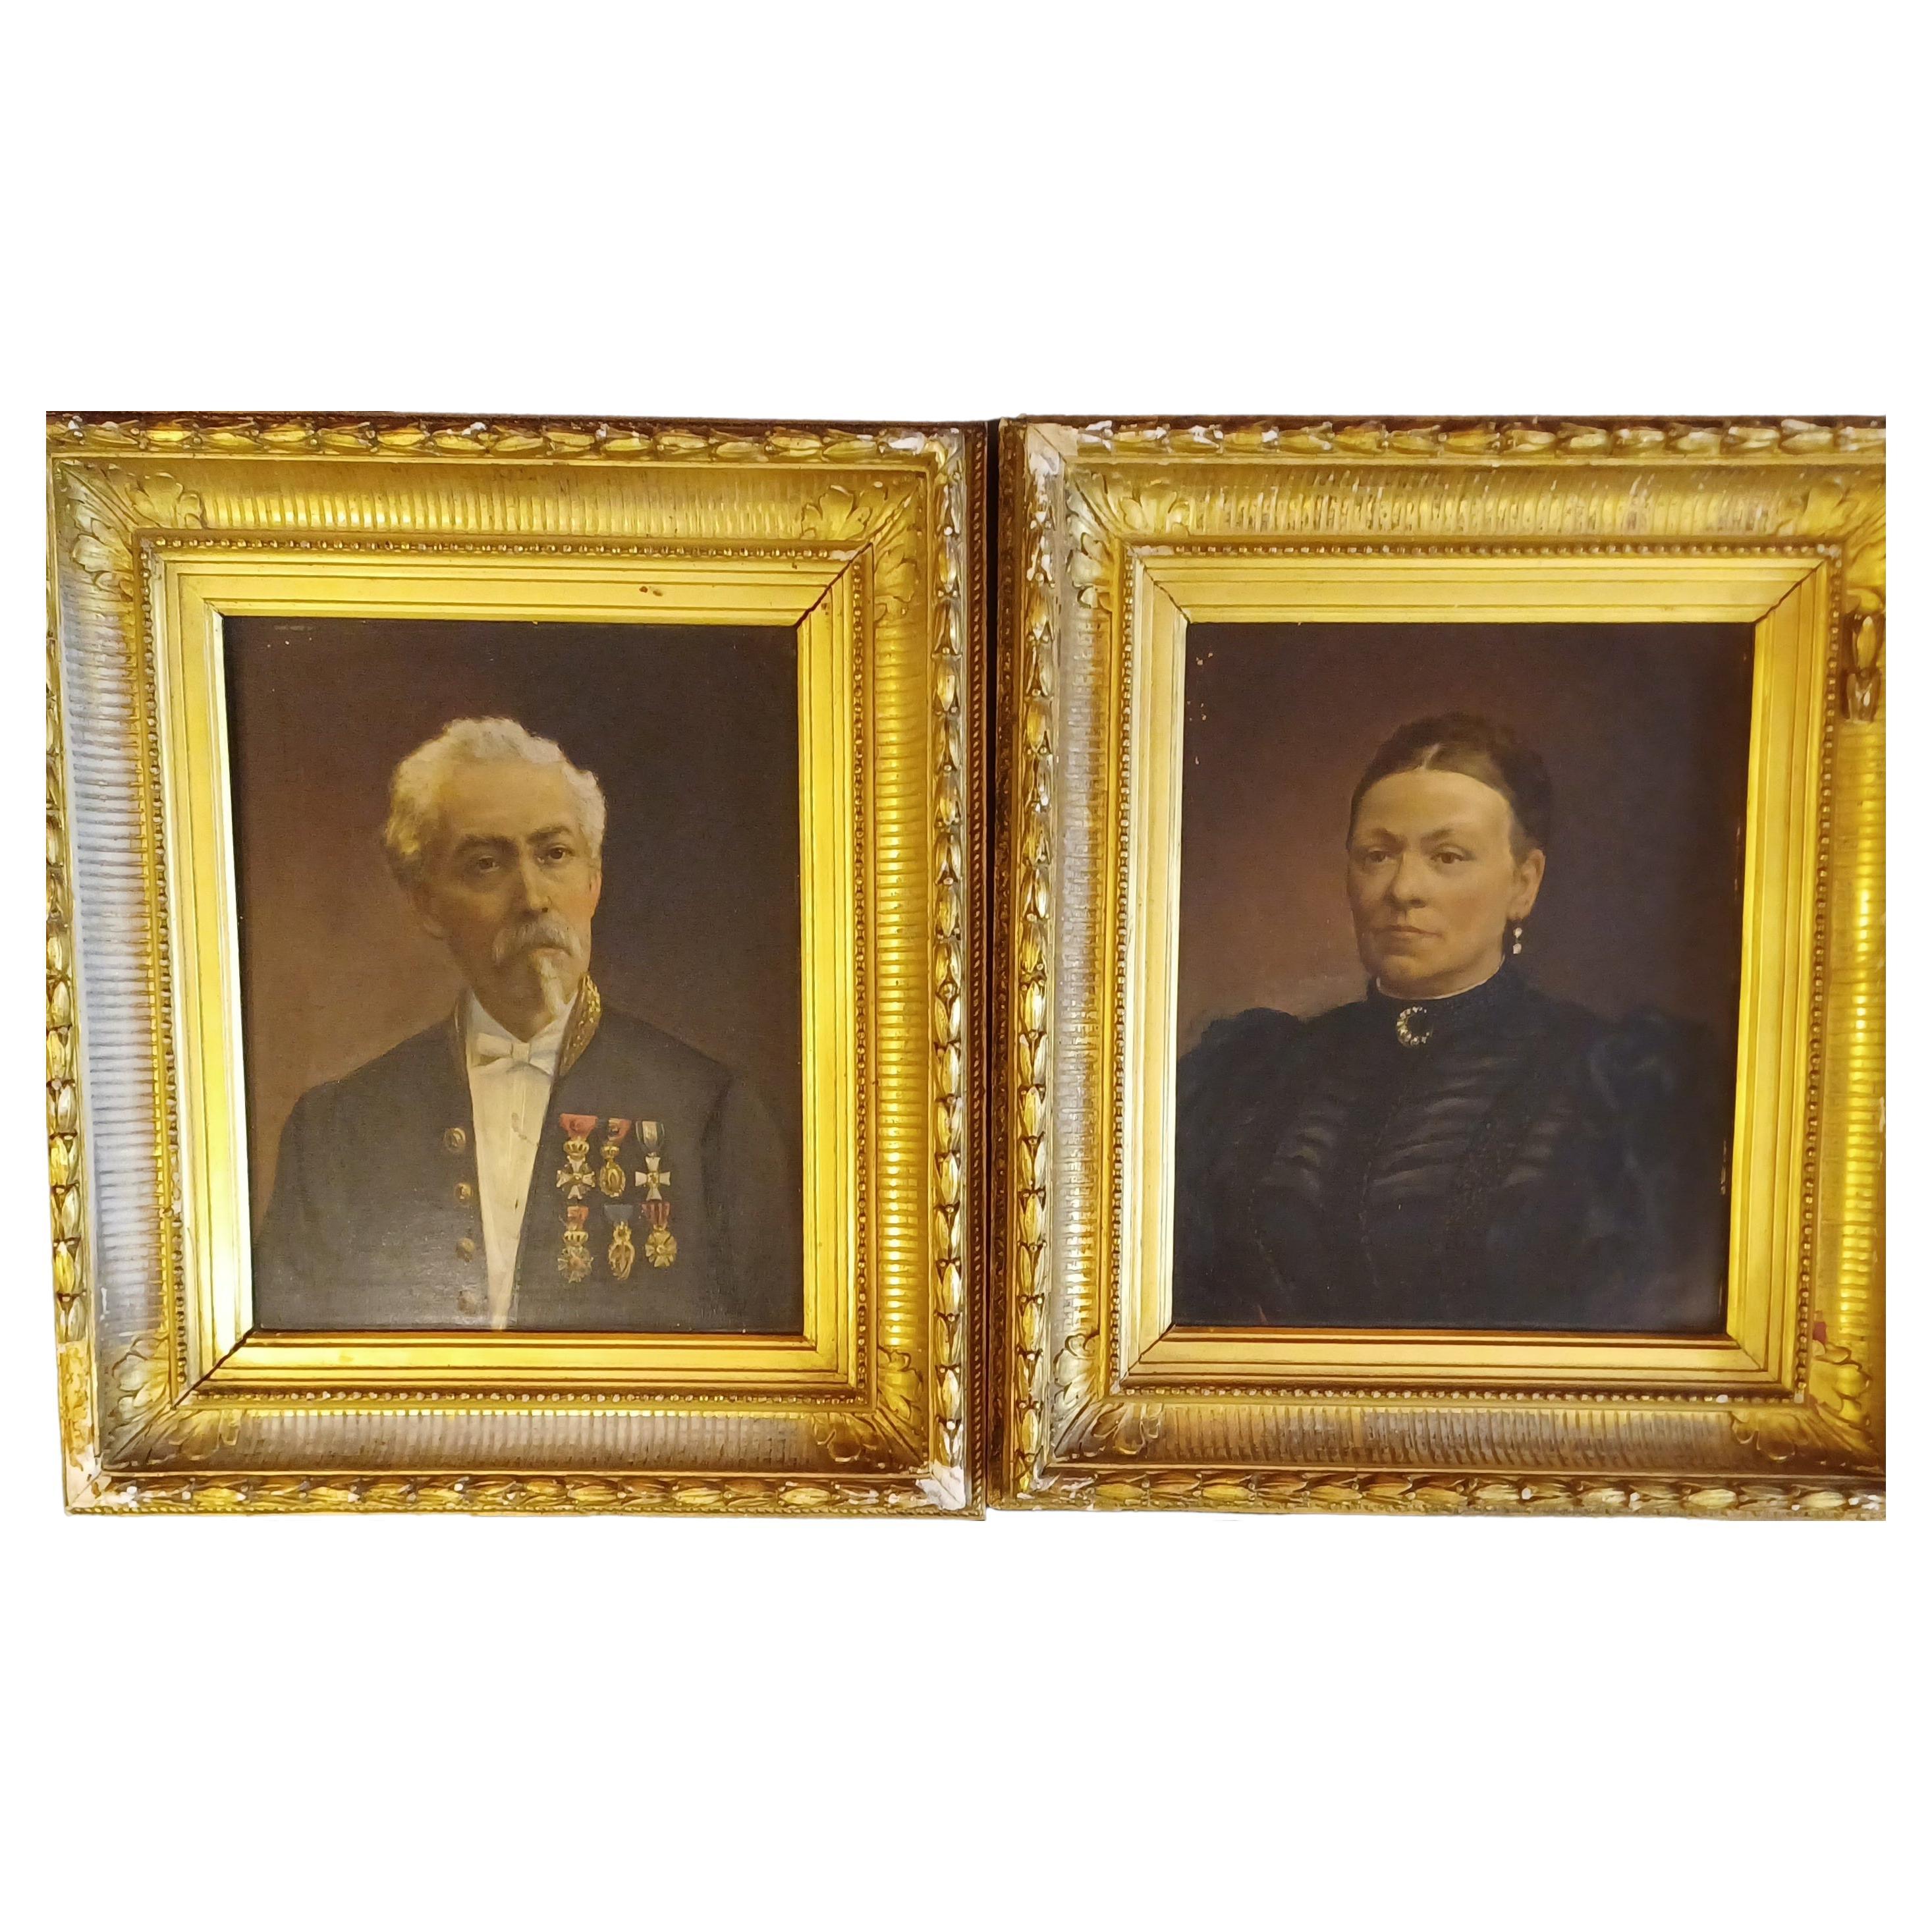 Late 19th century pair of portraits